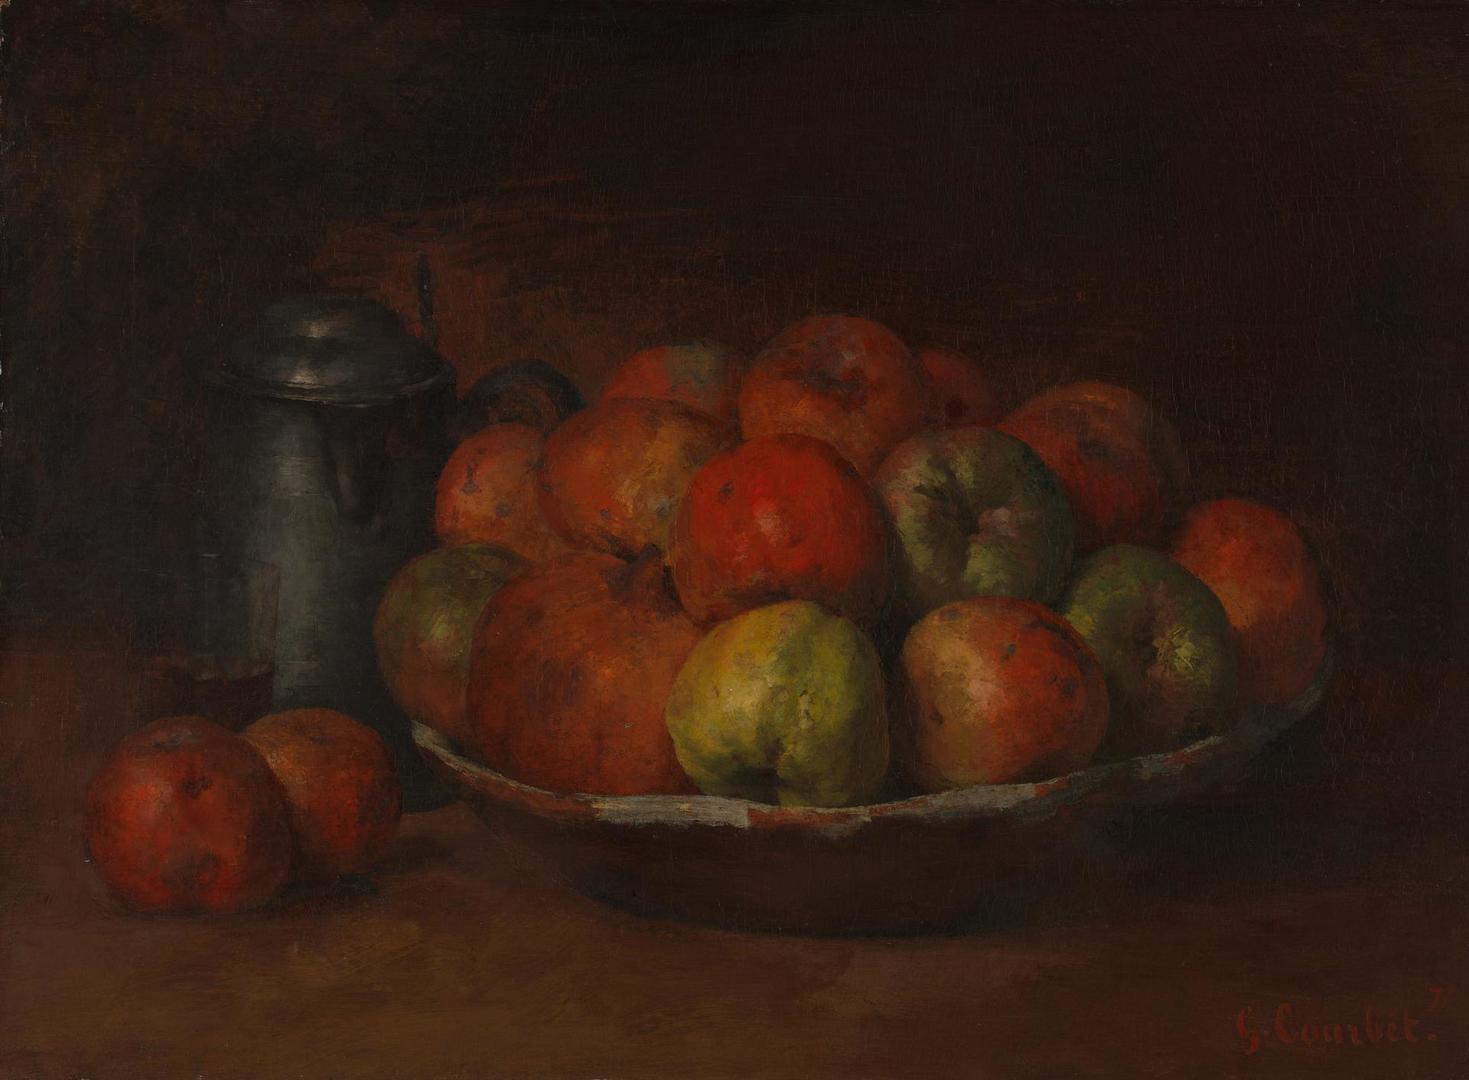 Still Life with Apples and a Pomegranate by Gustave Courbet